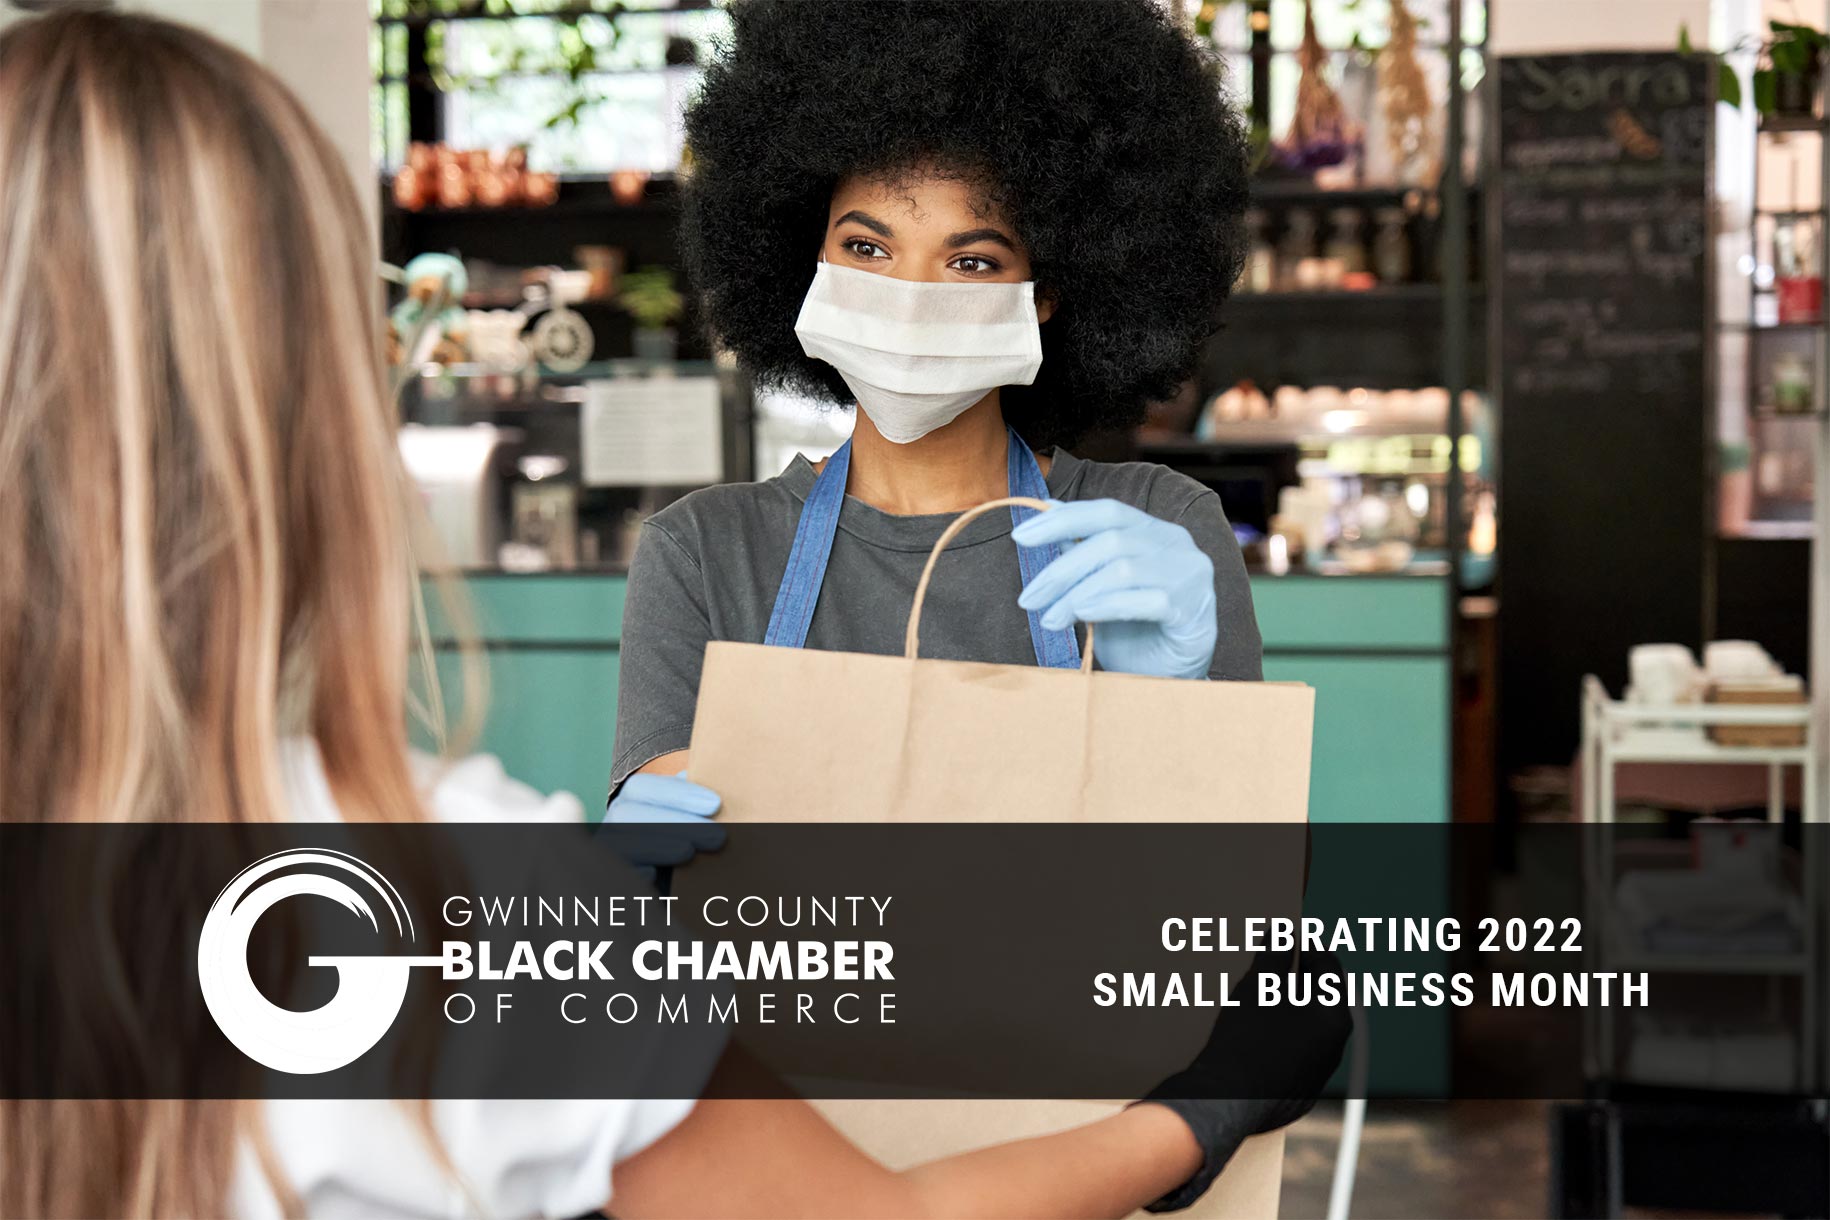 Gwinnett County Black Chamber of Commerce (GCBCC) Meeting – In-Person